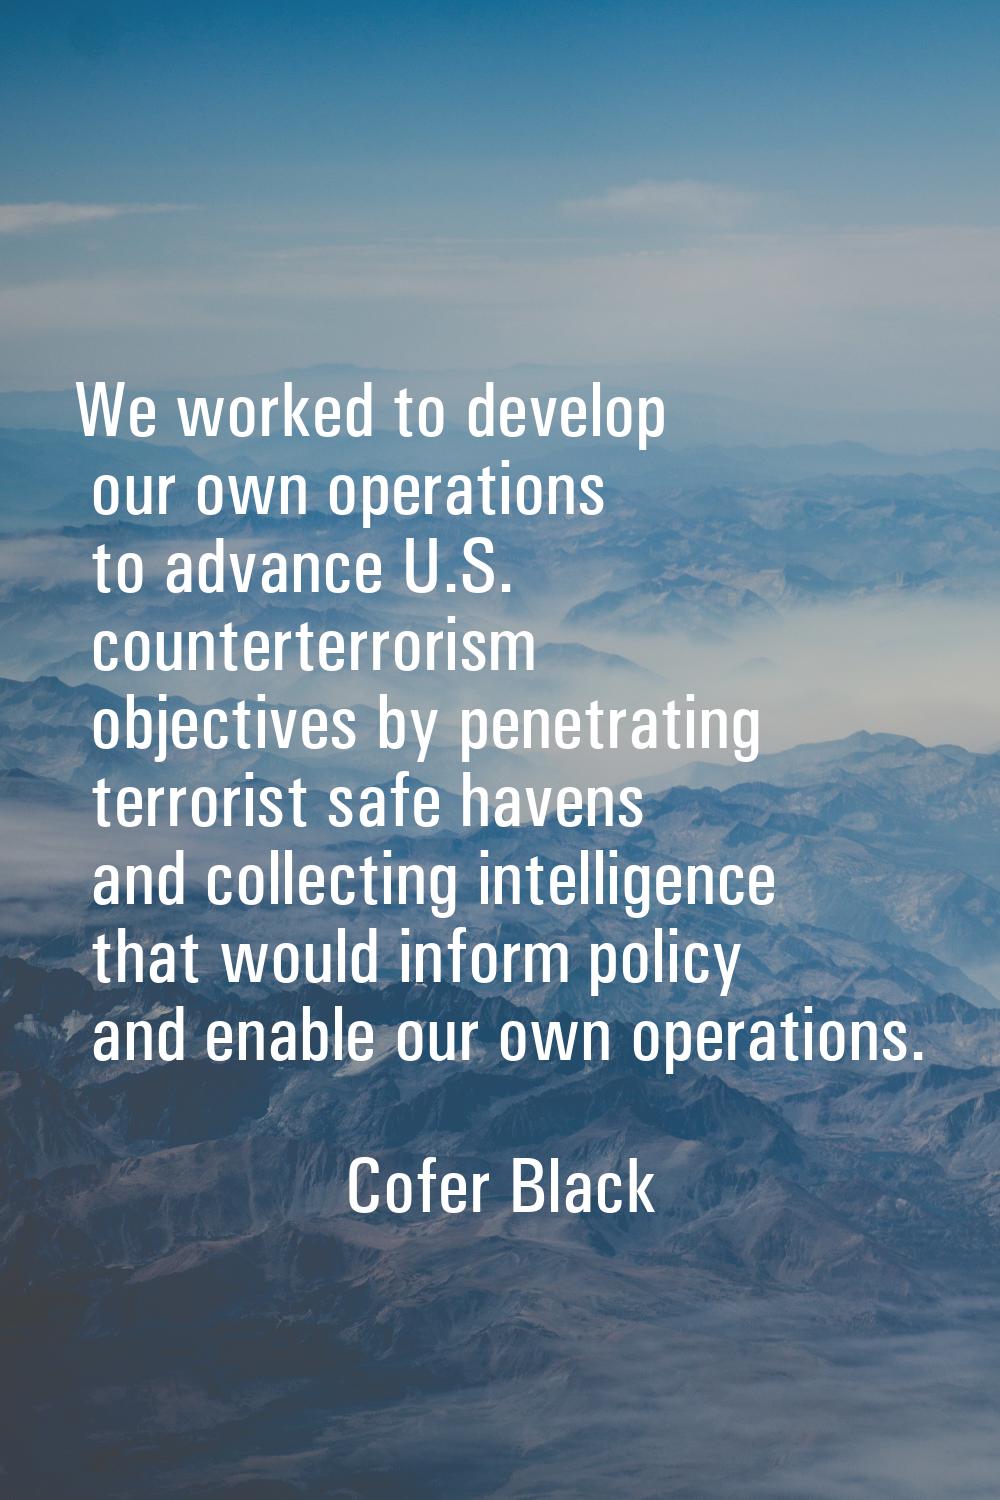 We worked to develop our own operations to advance U.S. counterterrorism objectives by penetrating 